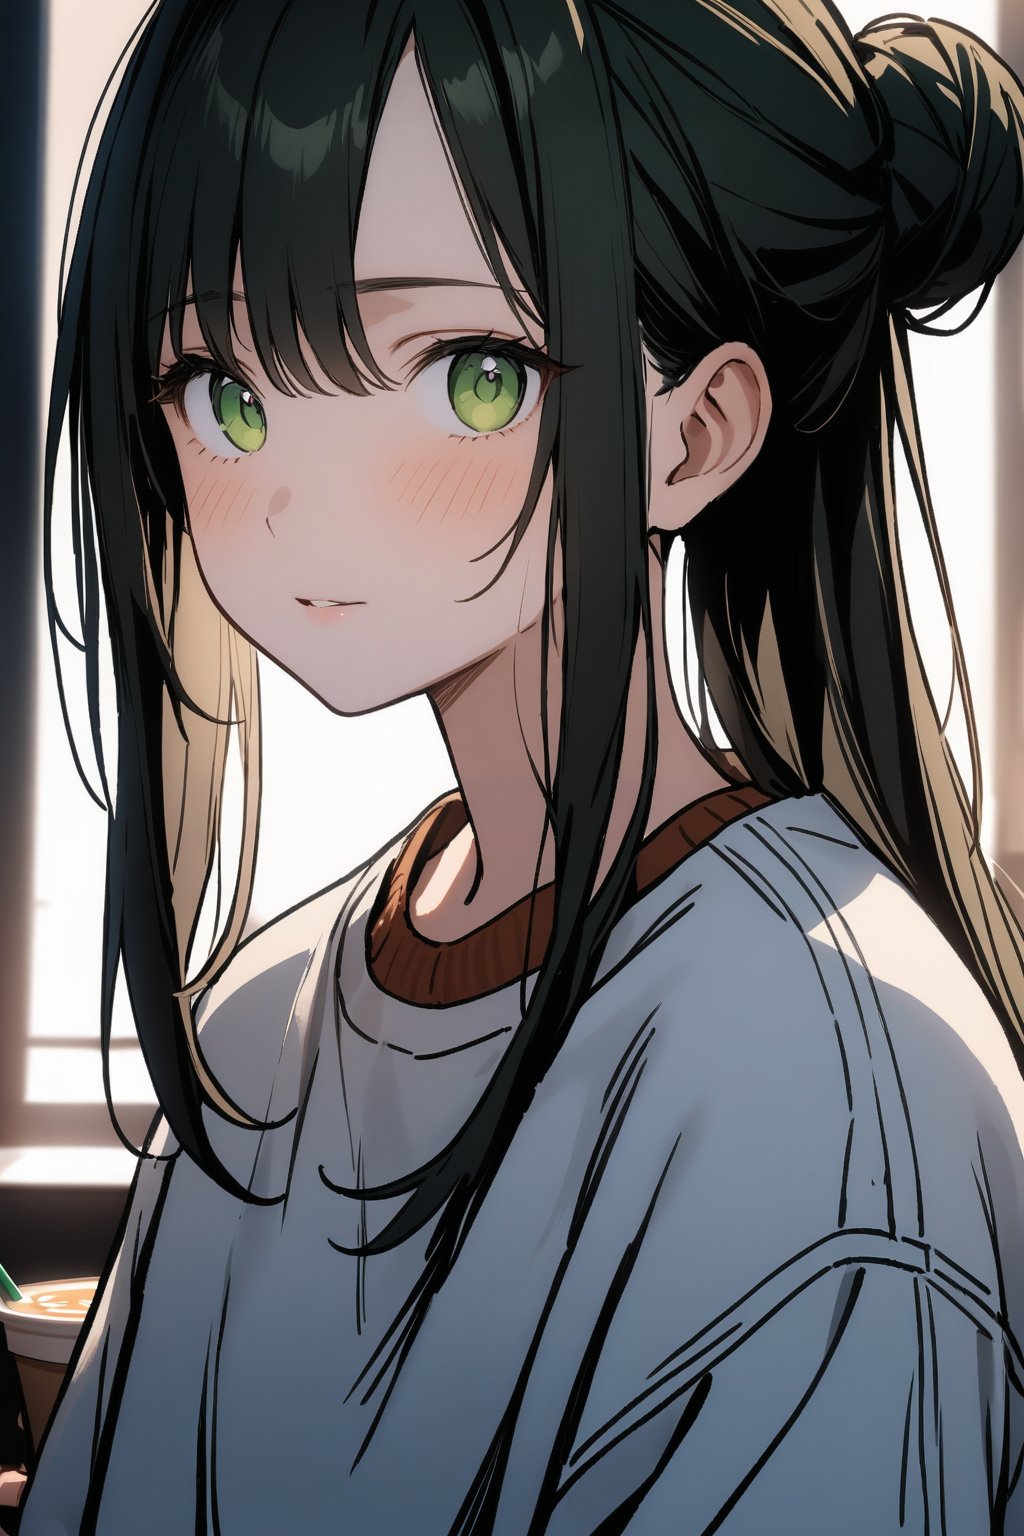 1girl, solo_female, long hair, black hair, buns, masterpiece, white sweatshirt, deep green eyes, cold expression, looking_at_the_viewer, wearing white denim shorts, portrait, closeup, tall girl, simple_background, outdoors in a cafe, starbucks, bright lighting, dramatic lighting, beautiful, lineart,txznf, standing